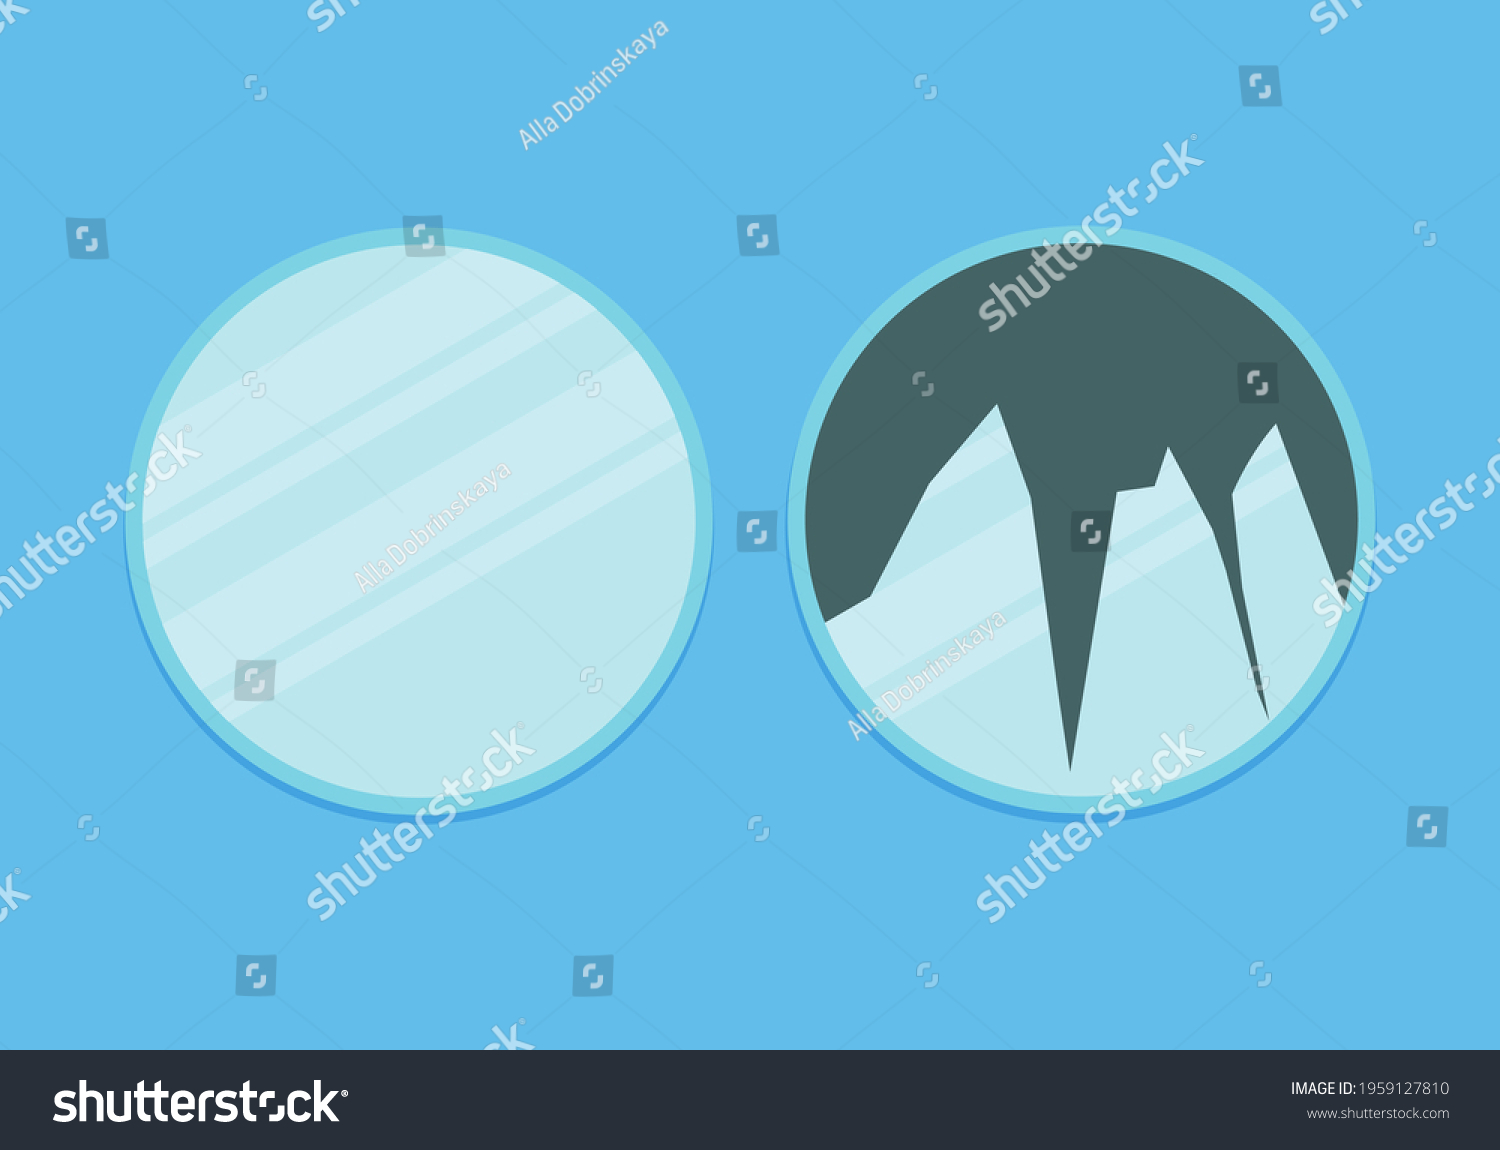 SVG of New and broken mirrors for a bathroom. Flat vector illustration. svg